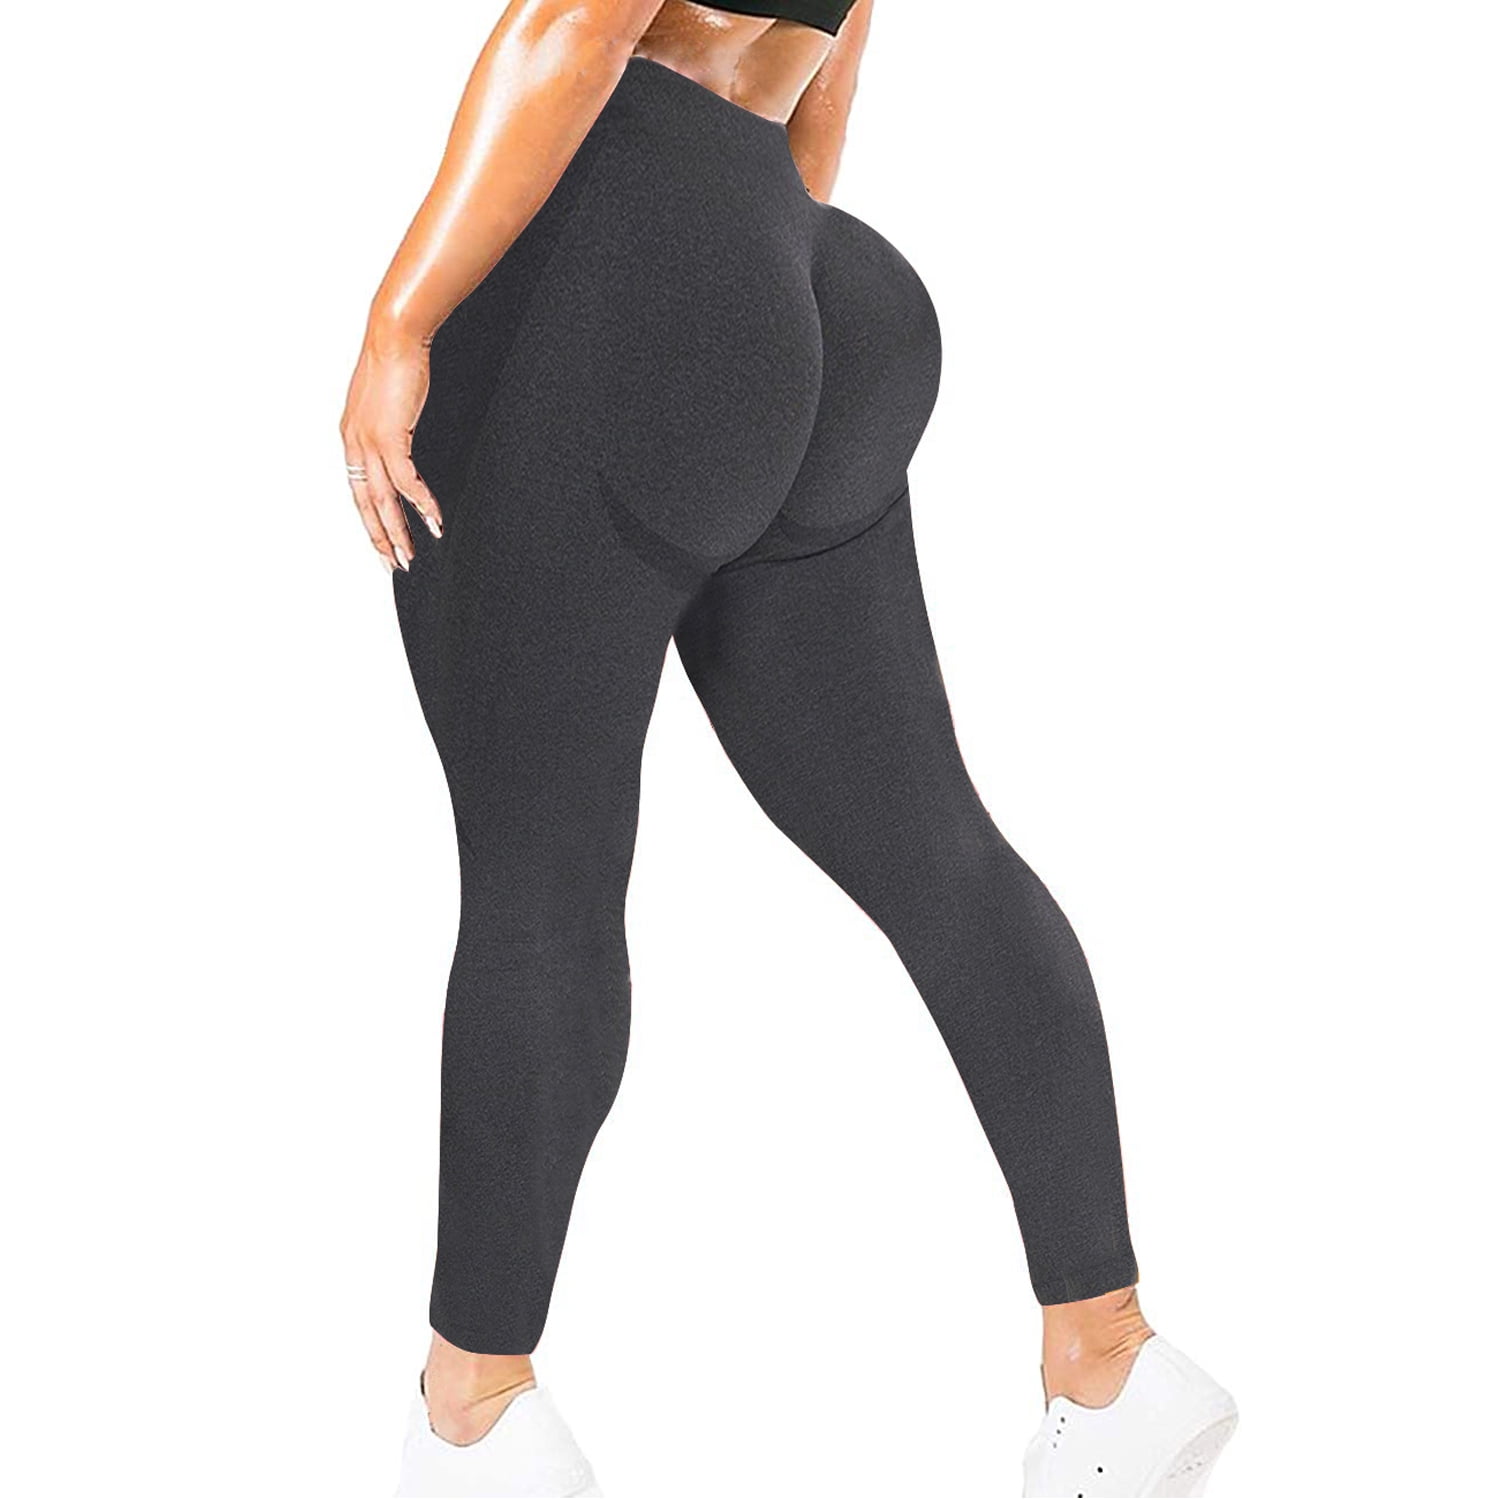 Womens Skinny Yoga Vital Seamless 2.0 Leggings With Butt Lifts No  Embarrassing Line For Sport And Workouts From Outdoor012, $16.19